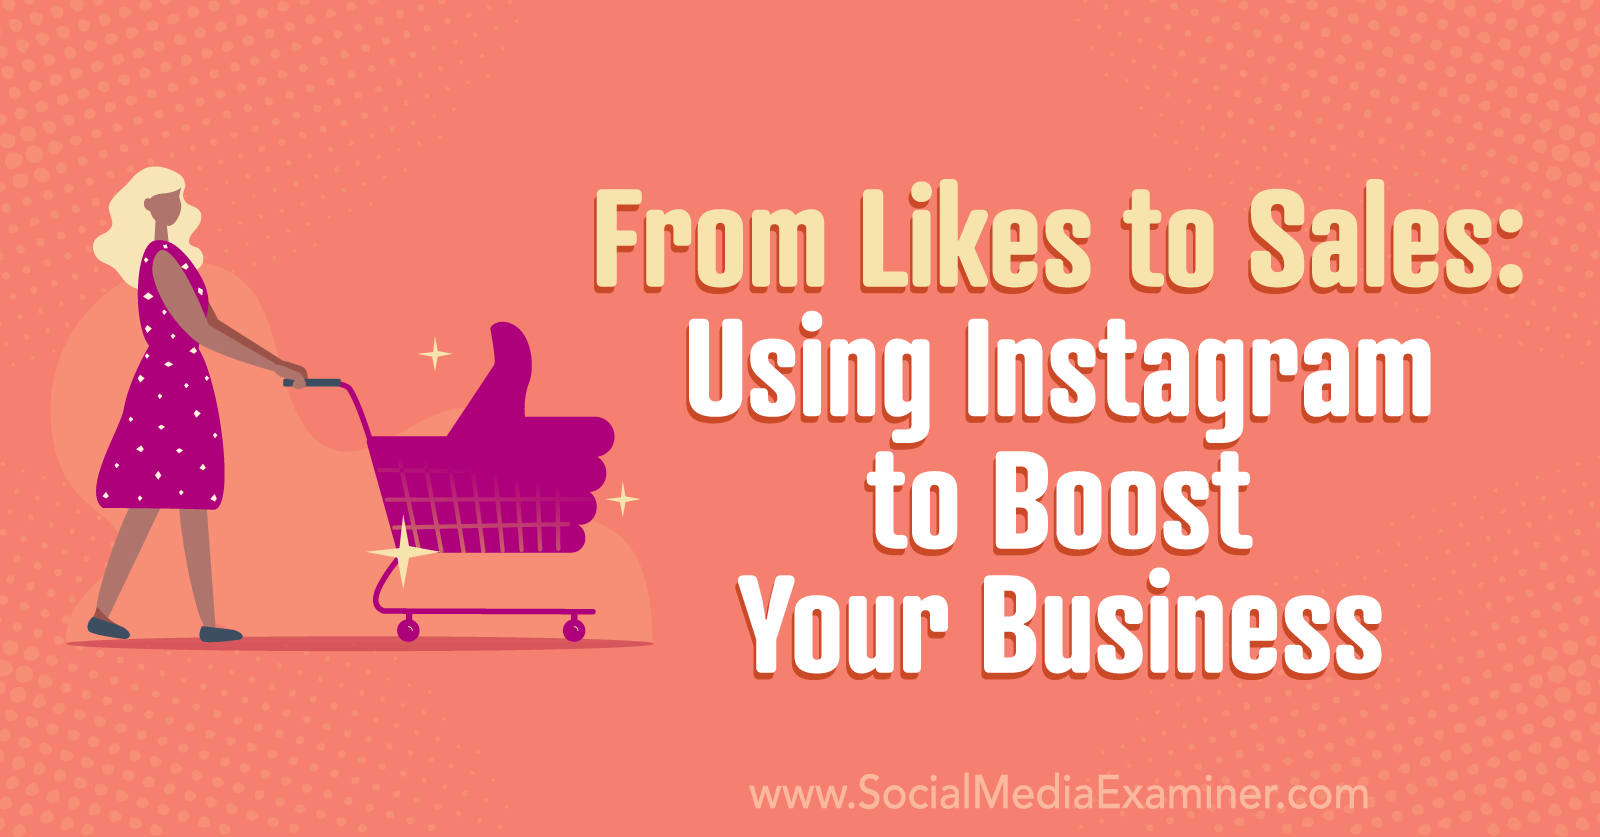 From Likes to Sales: Using Instagram to Boost Your Business by Social Media Examiner